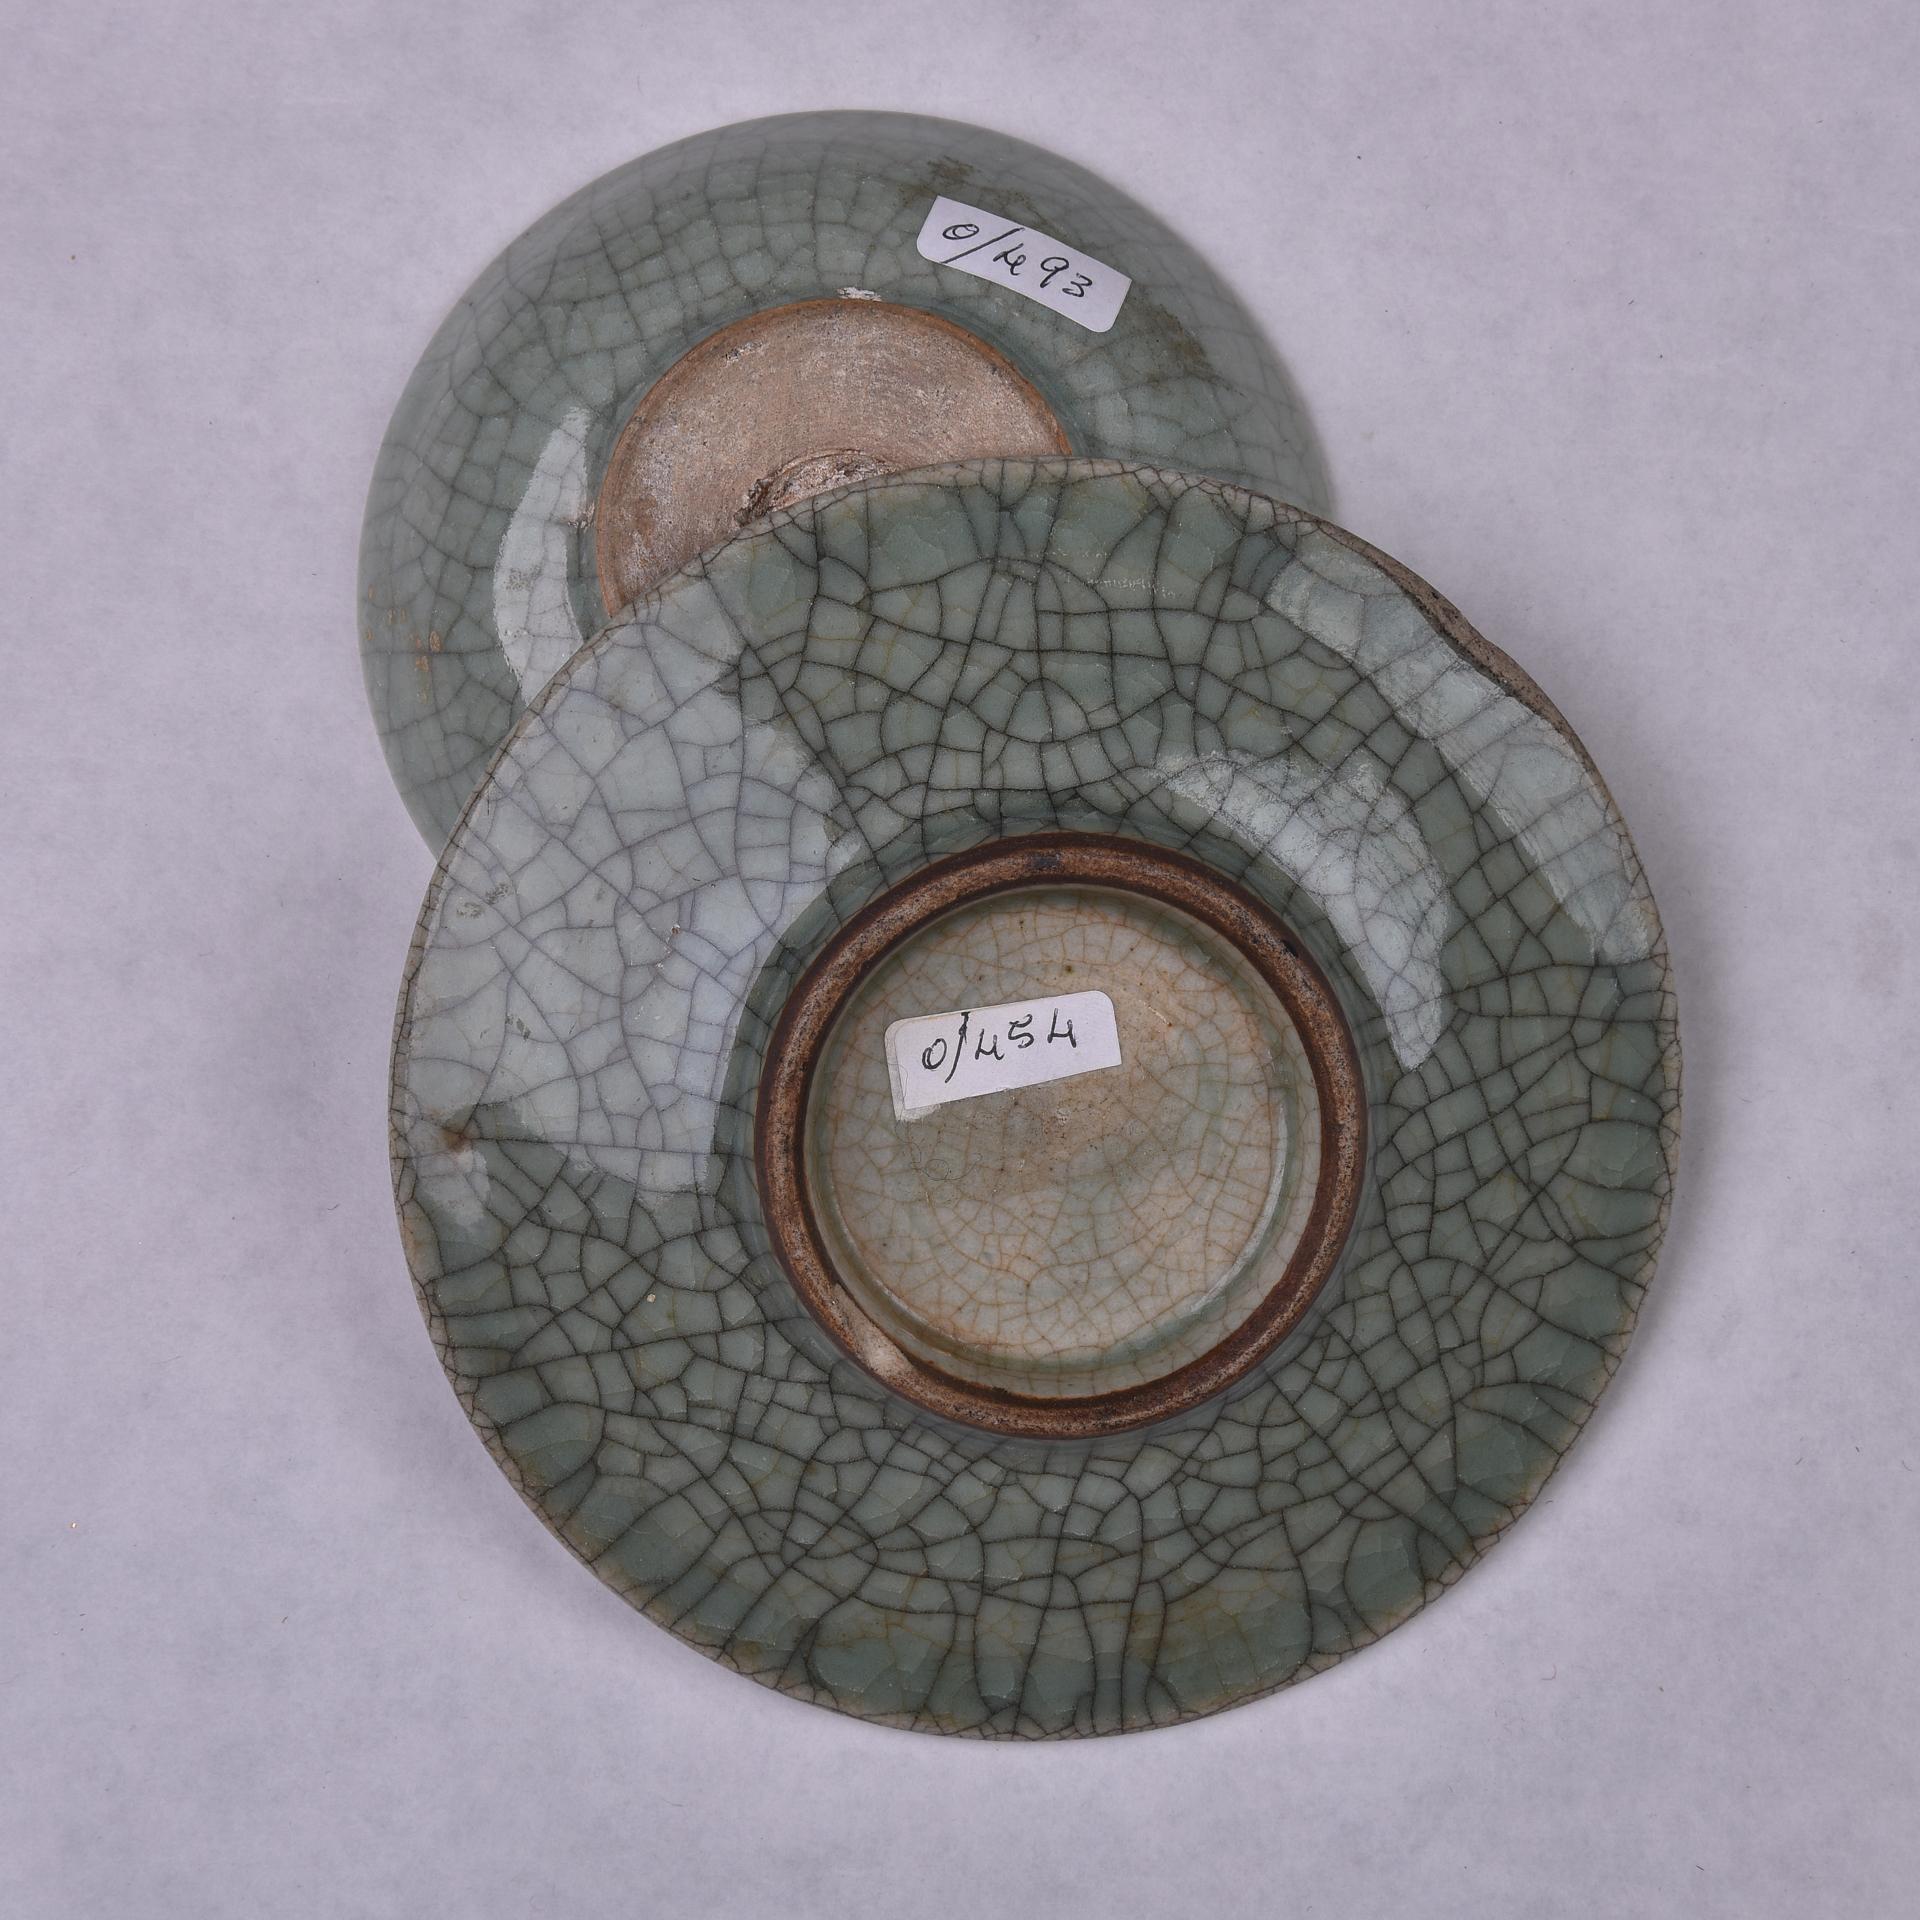 Little Chinese Celadon plates from my private collection, about 35 yars ago and never exhibited to the public. 
The sizes published are for the biggest; the other one is diameter 10.4 and high 3 cm.